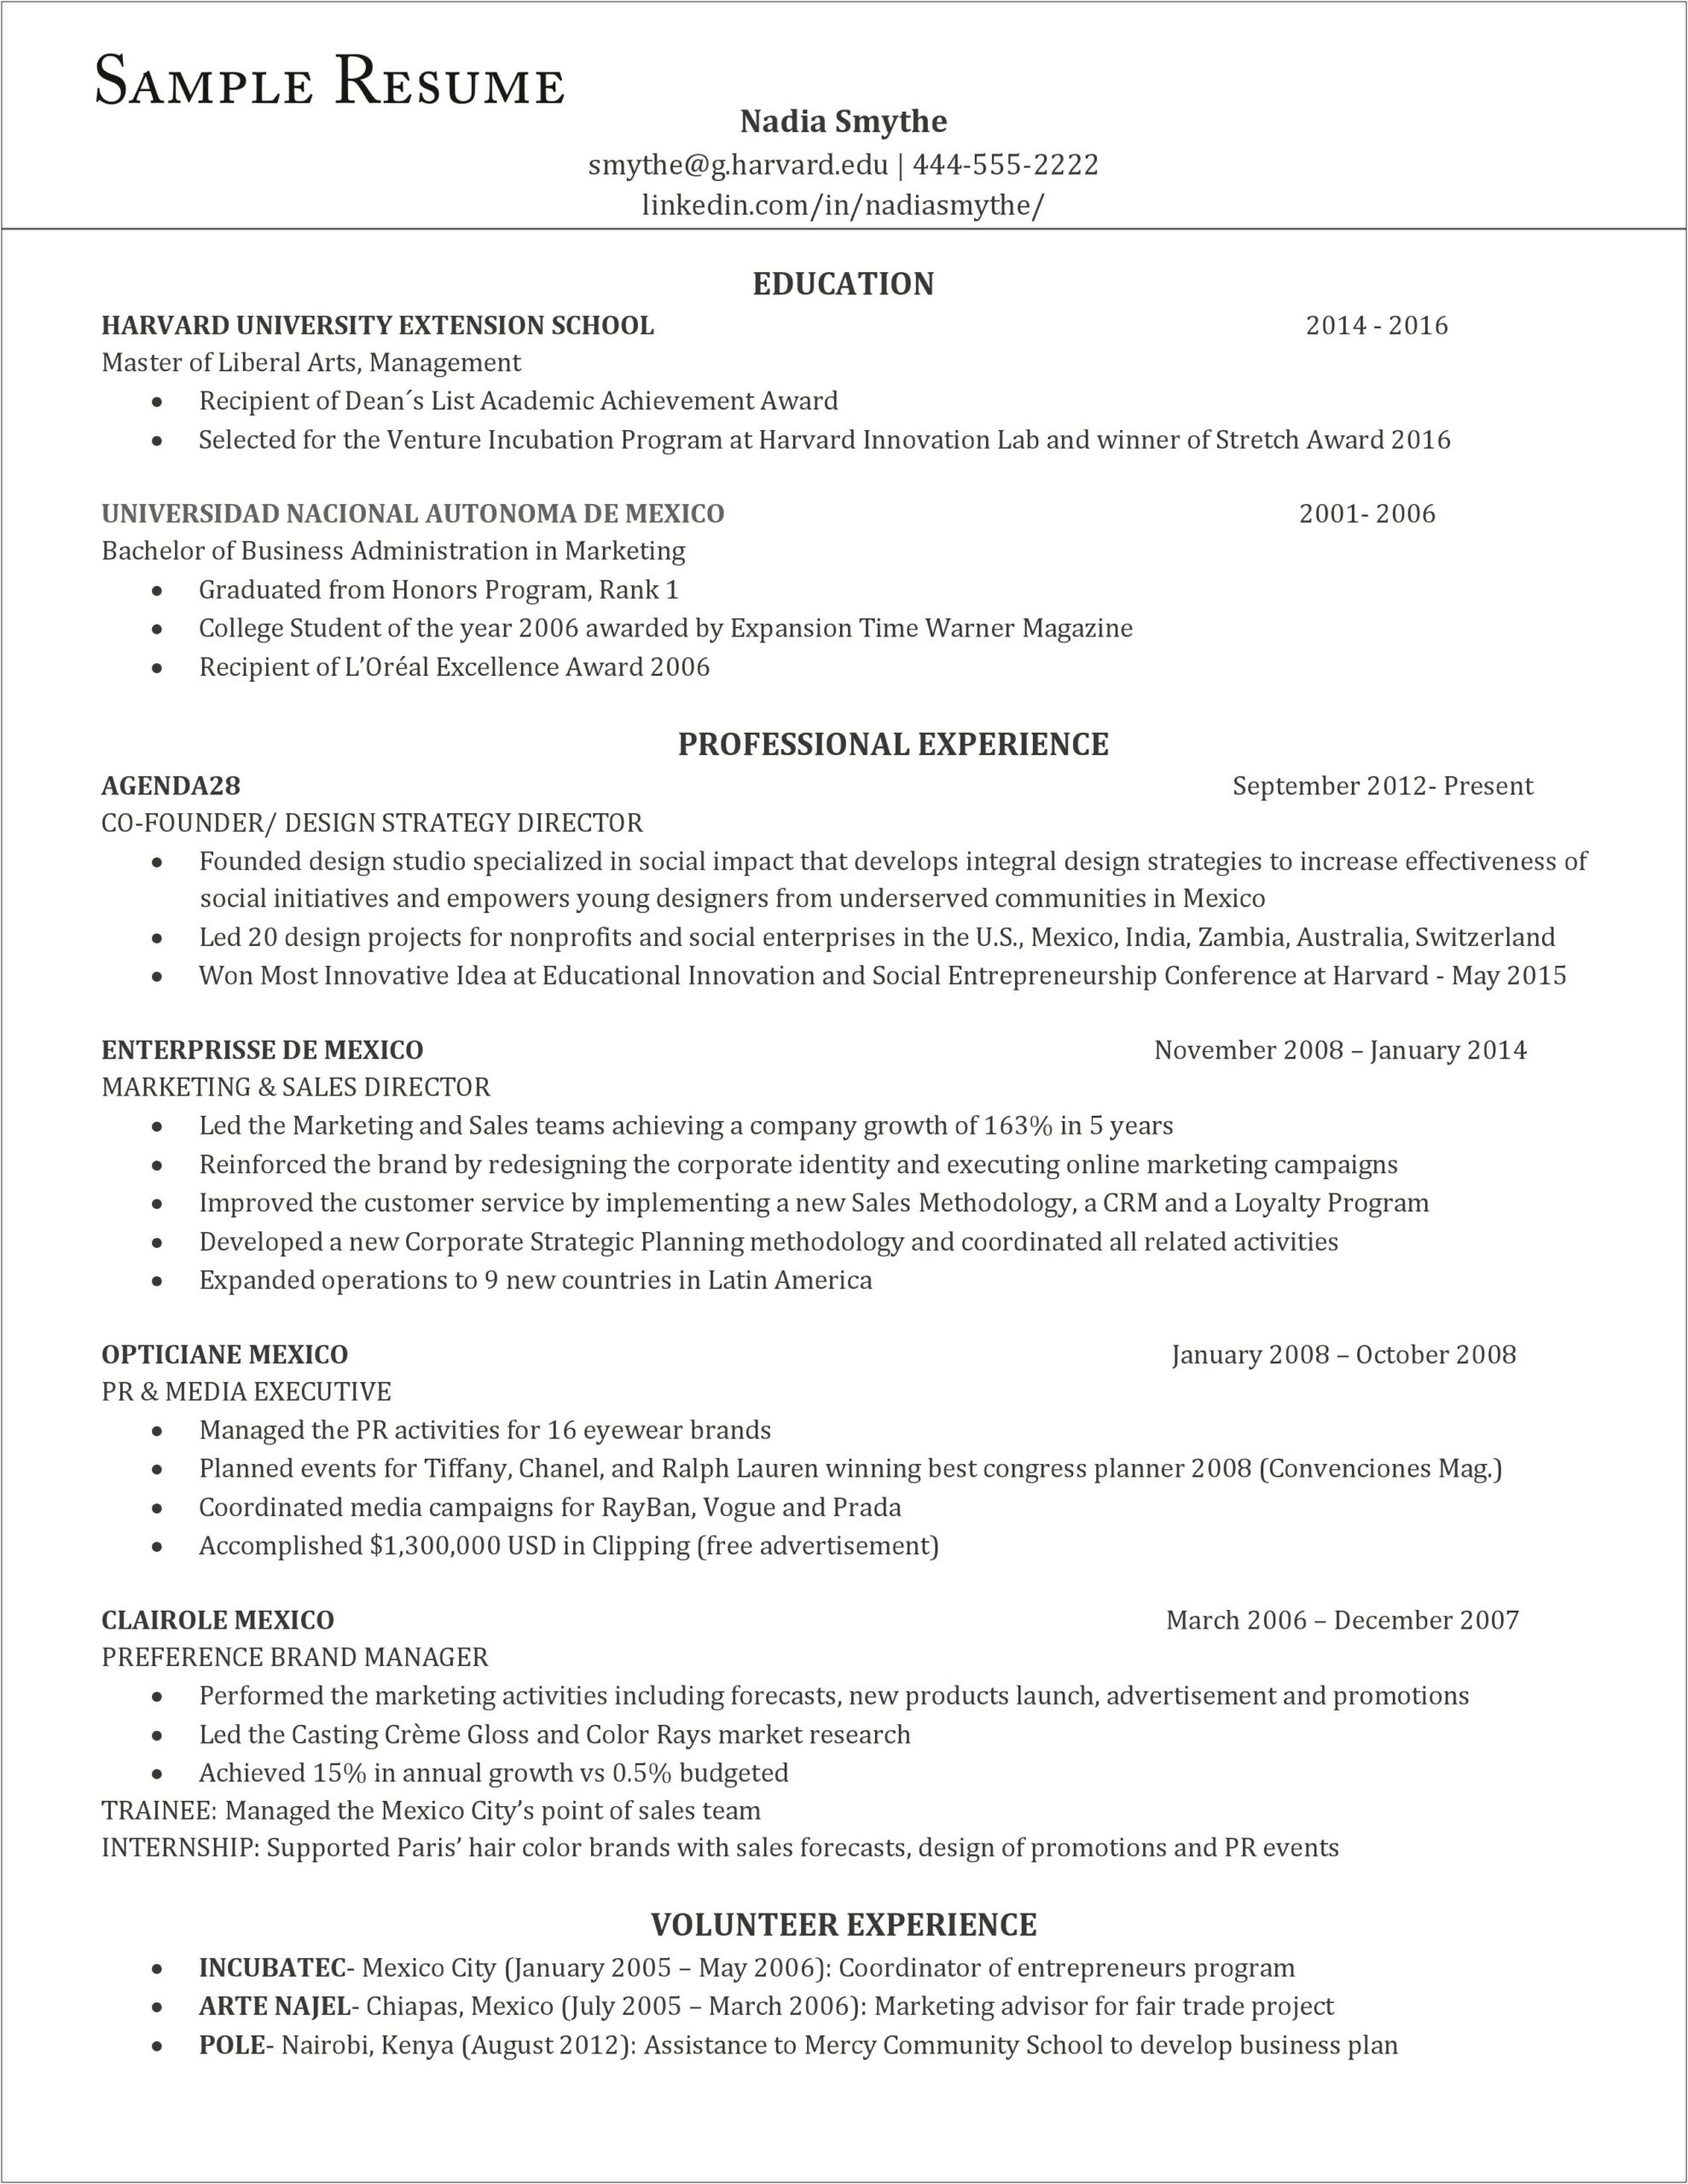 Things That Look Good On A College Resume